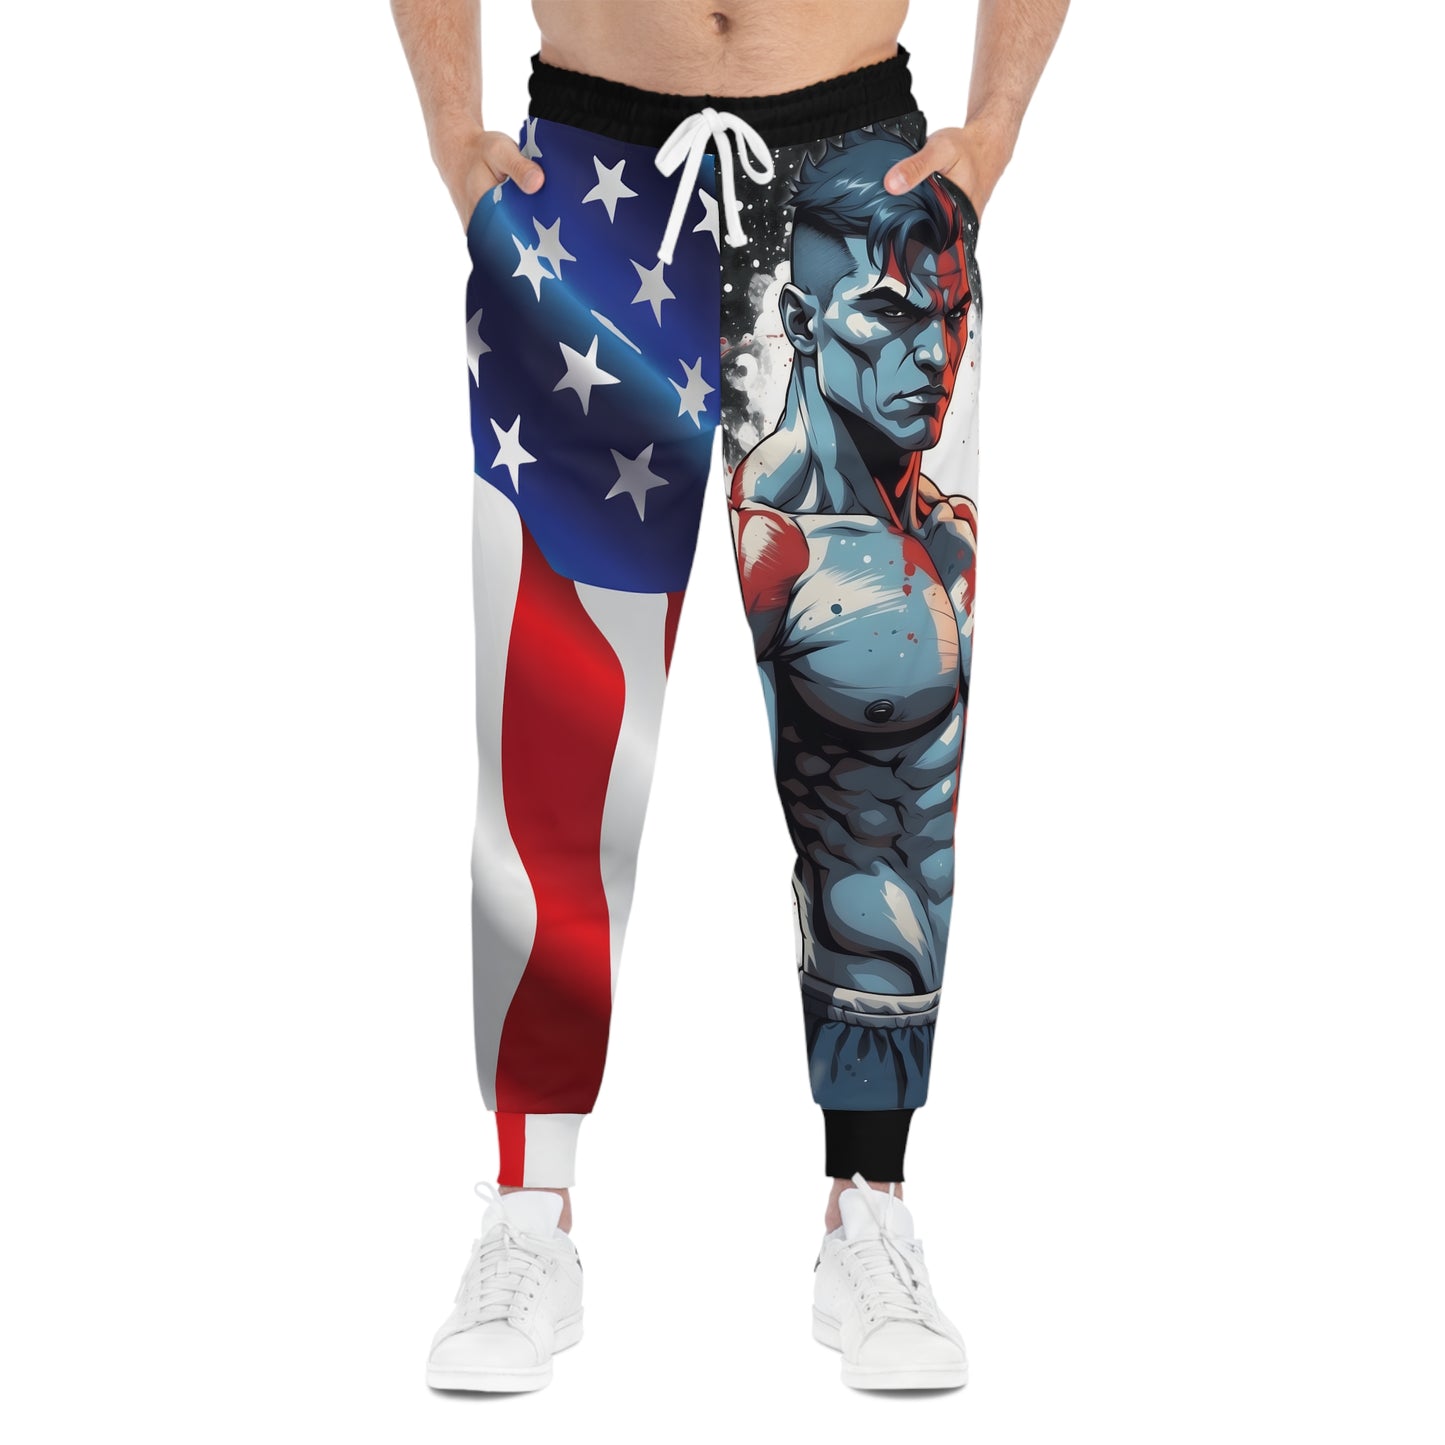 Kǎtōng Piàn - Prized Fighter Collection - America - 003 - Athletic Joggers